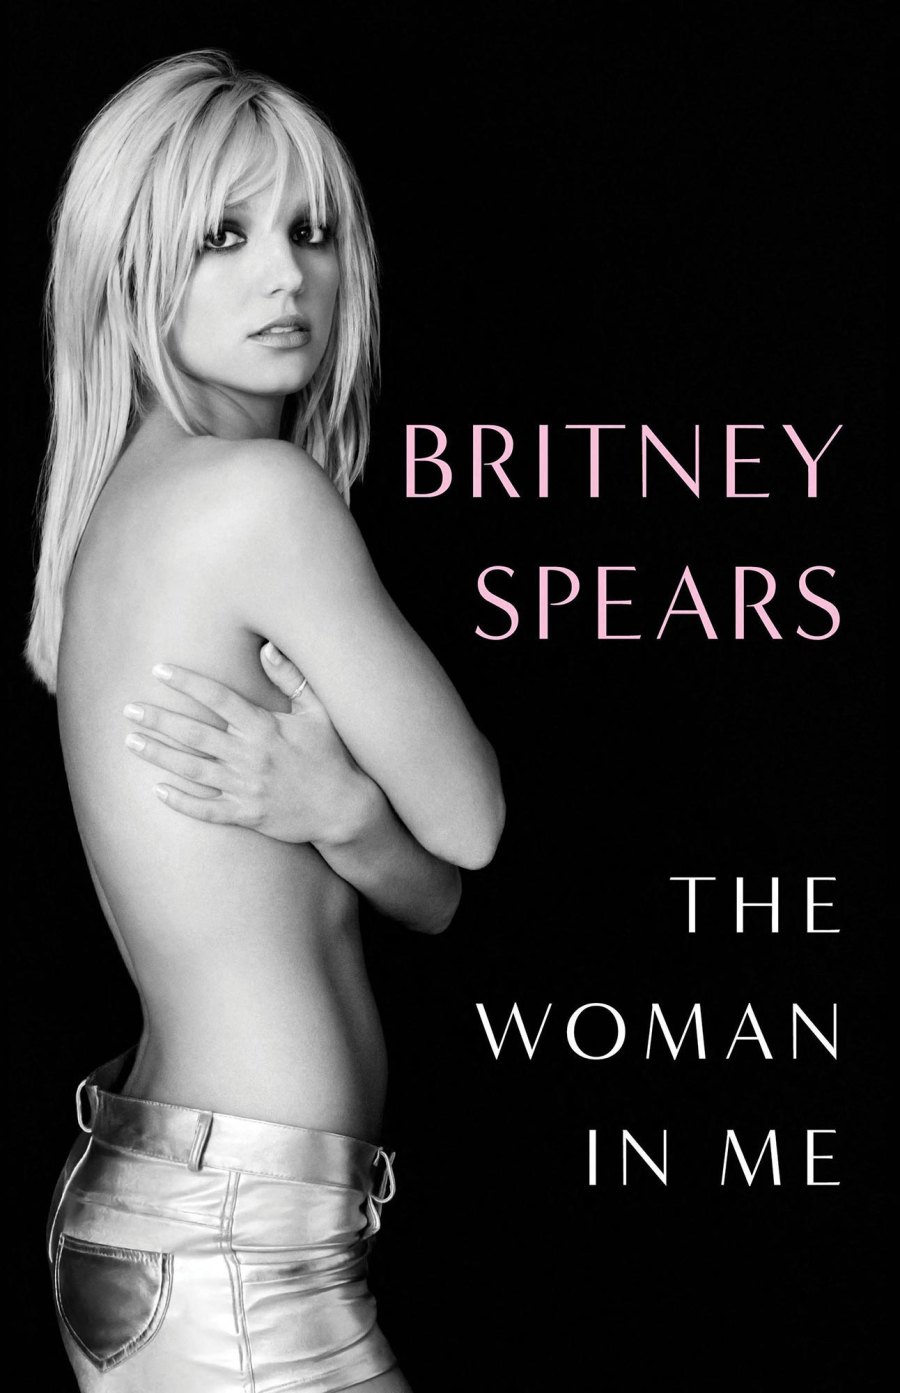 Britney Spears Says 'The Woman in Me' Memoir Isn't Meant 'To Offend Anyone,' Written for 'Closure'